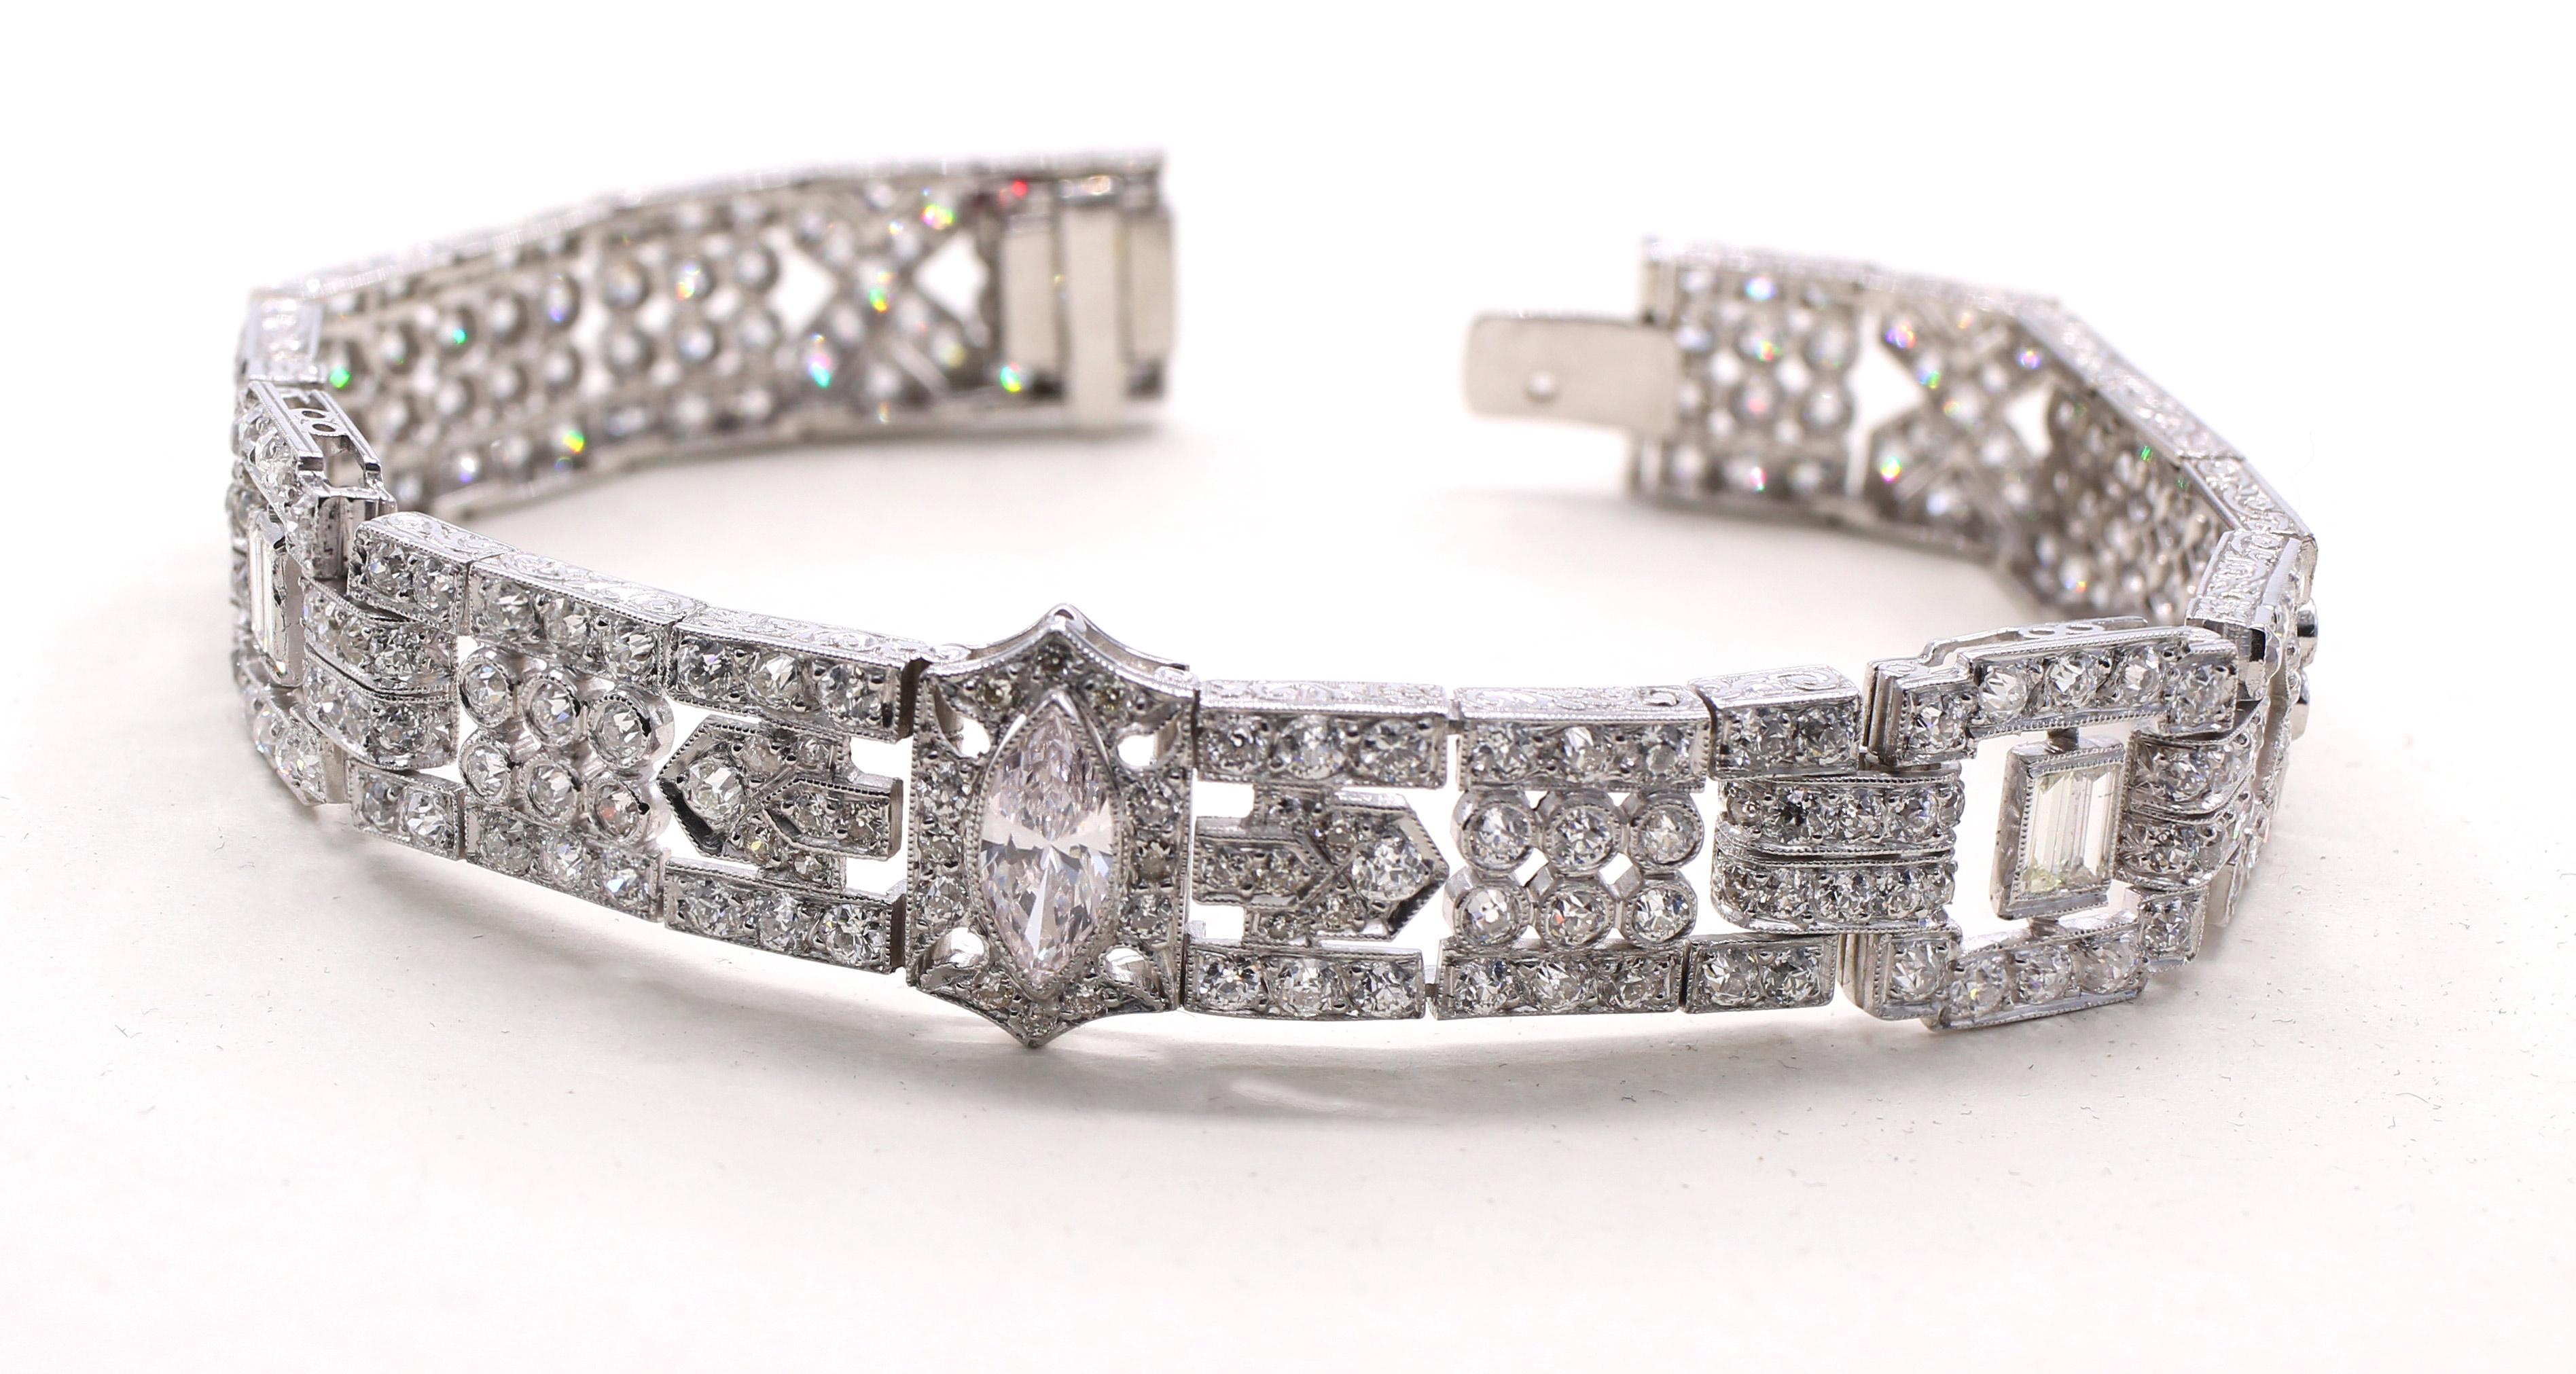 Magnificently designed and masterfully handcrafted in platinum this French Art Deco bracelet from ca 1925 is a true piece of art. The typical geometrical design from this era is beautifully displayed in this flexible bracelet with the center lozenge